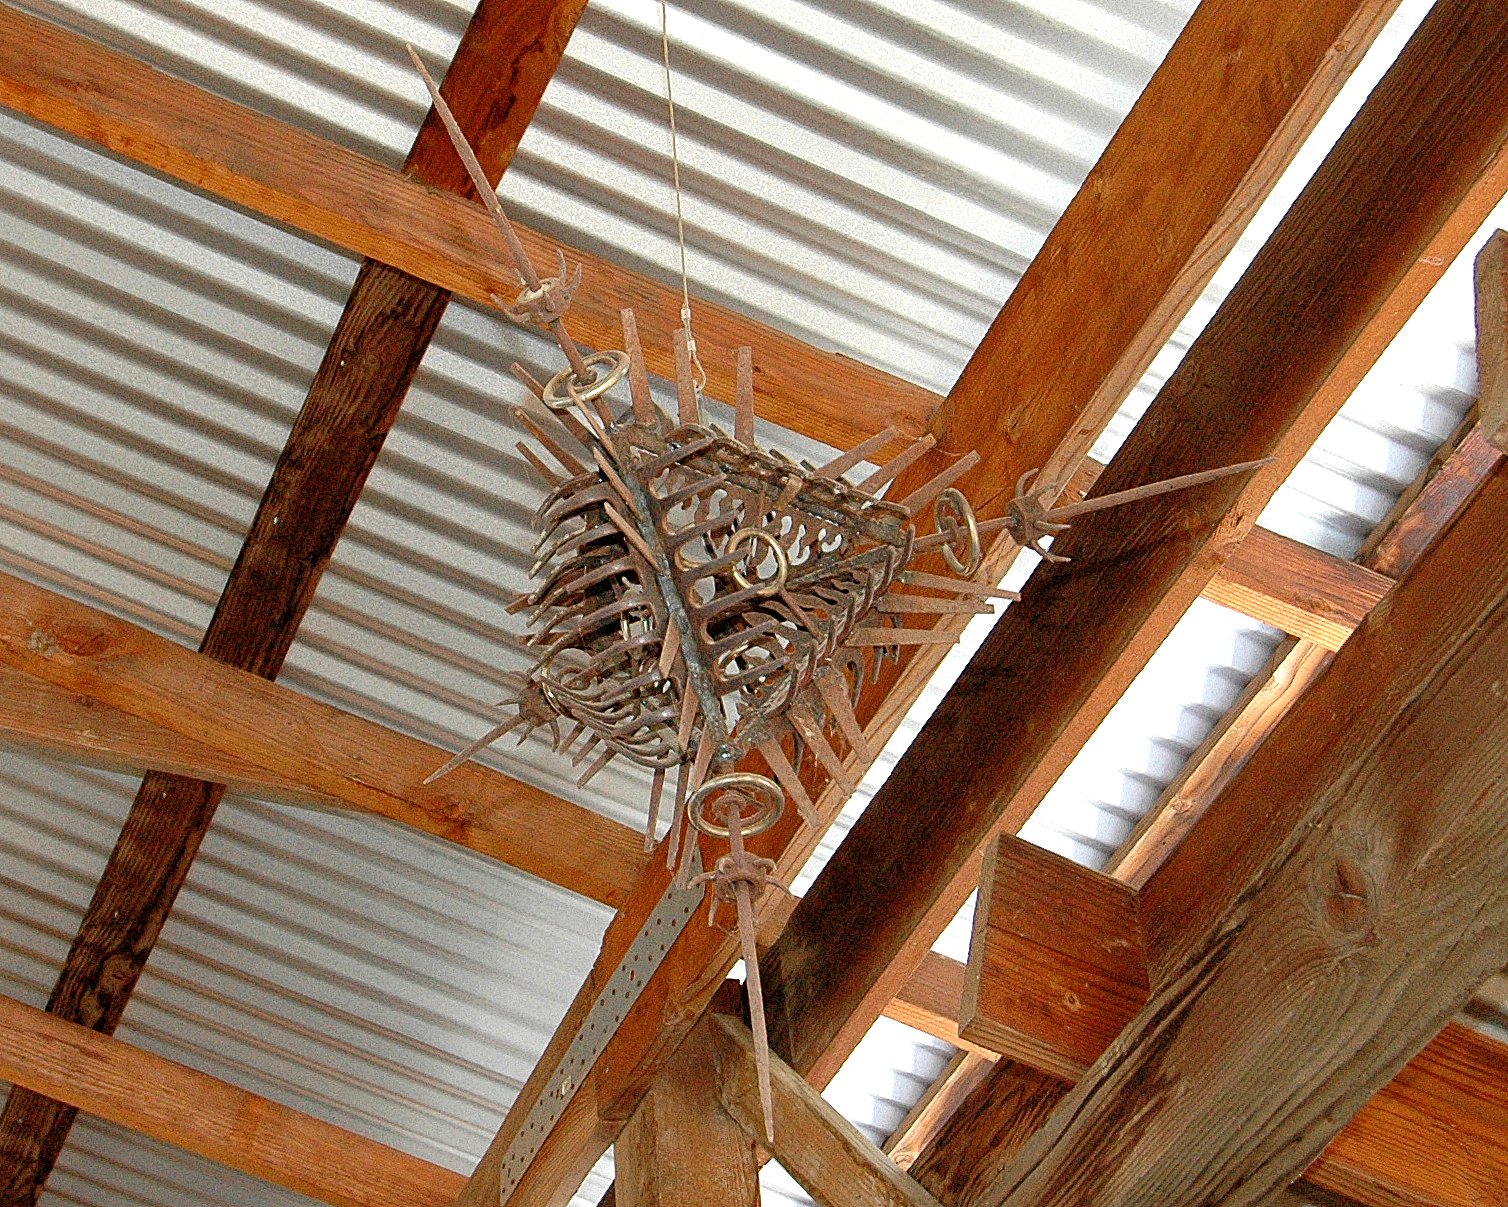 an articulated, dense, aggressive "Tetrahedron in Disguise" made of welded steel elements